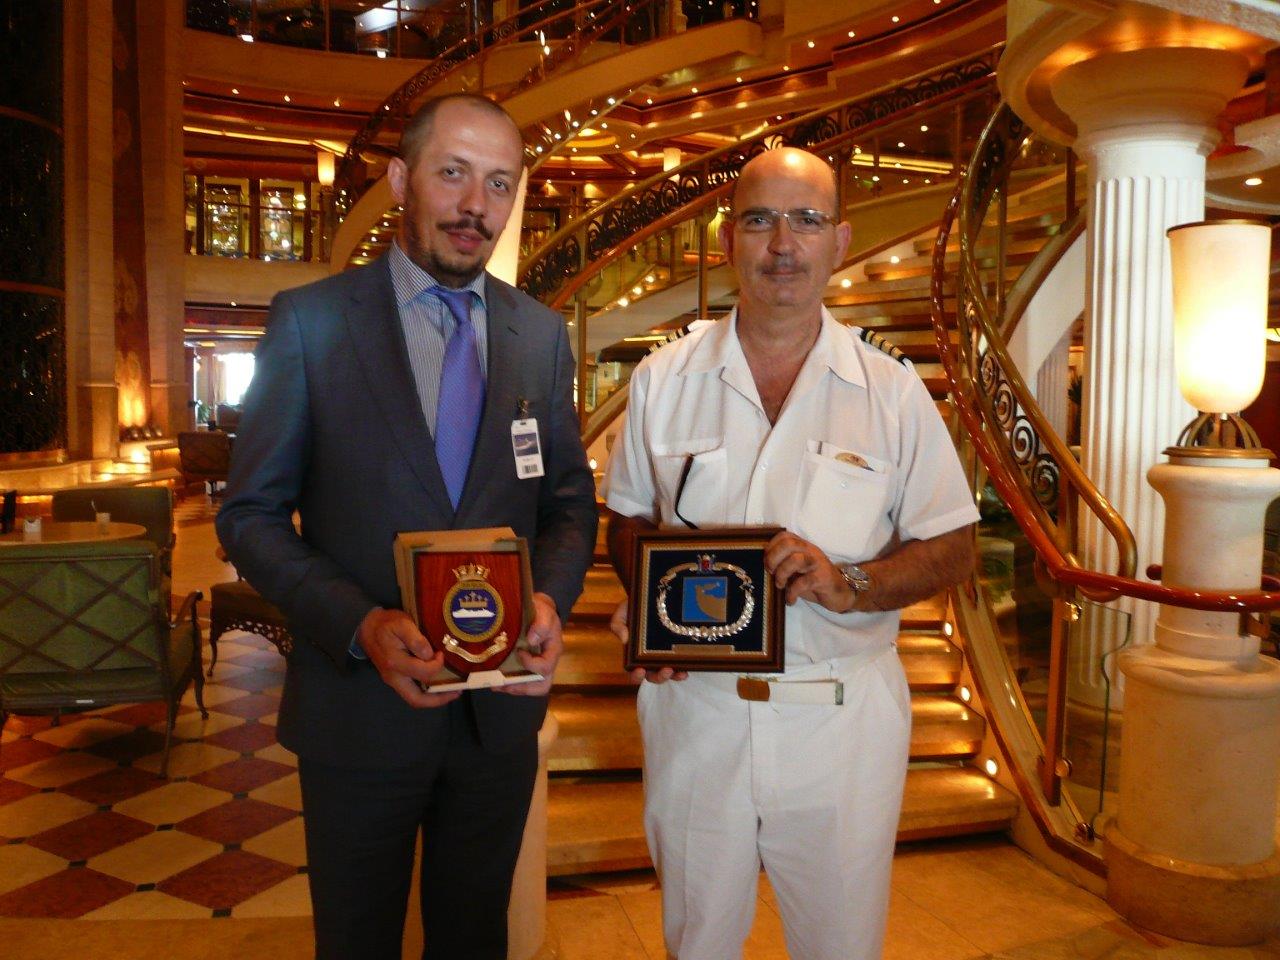 The traditional Plaque Ceremony was held onboard at the morning.